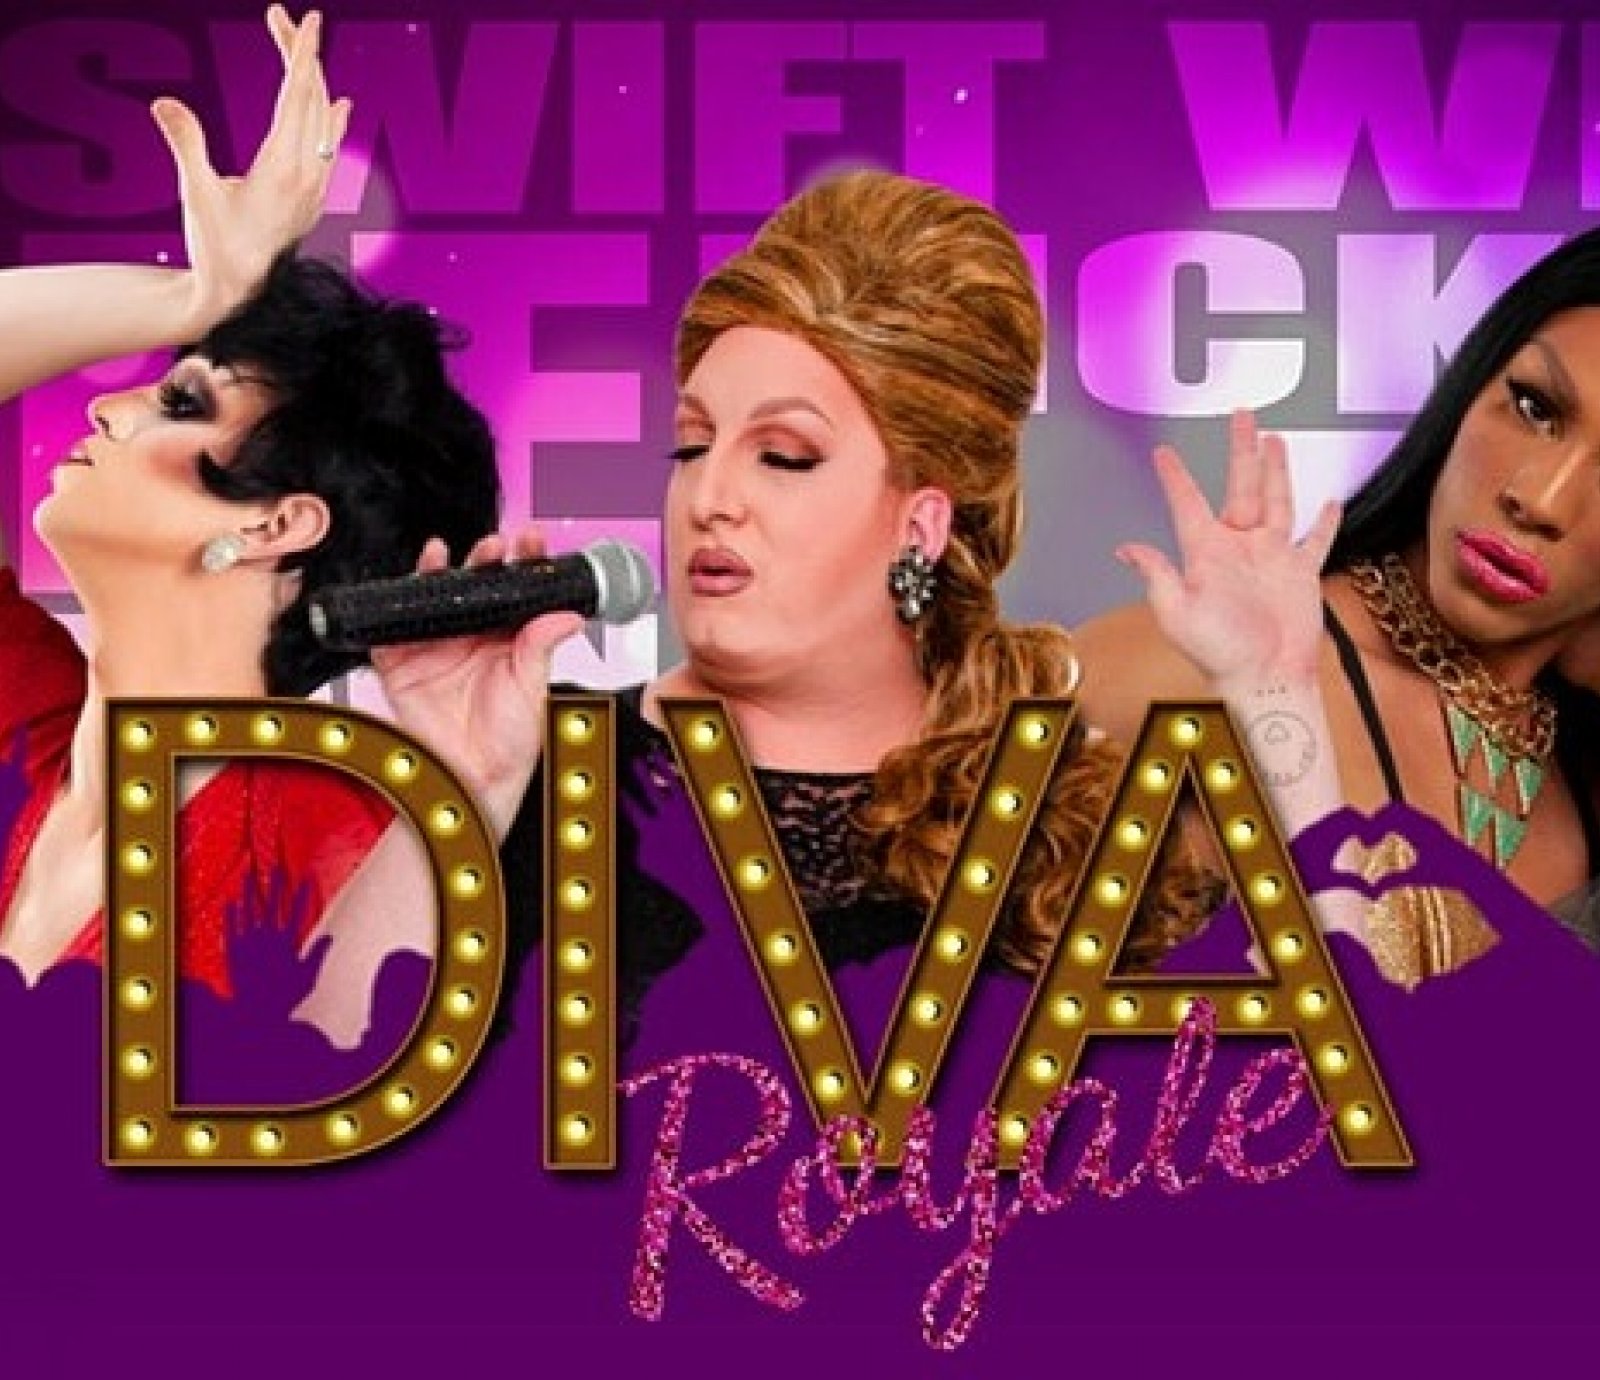 Diva Royale Show - Drag Queen Show Chicago